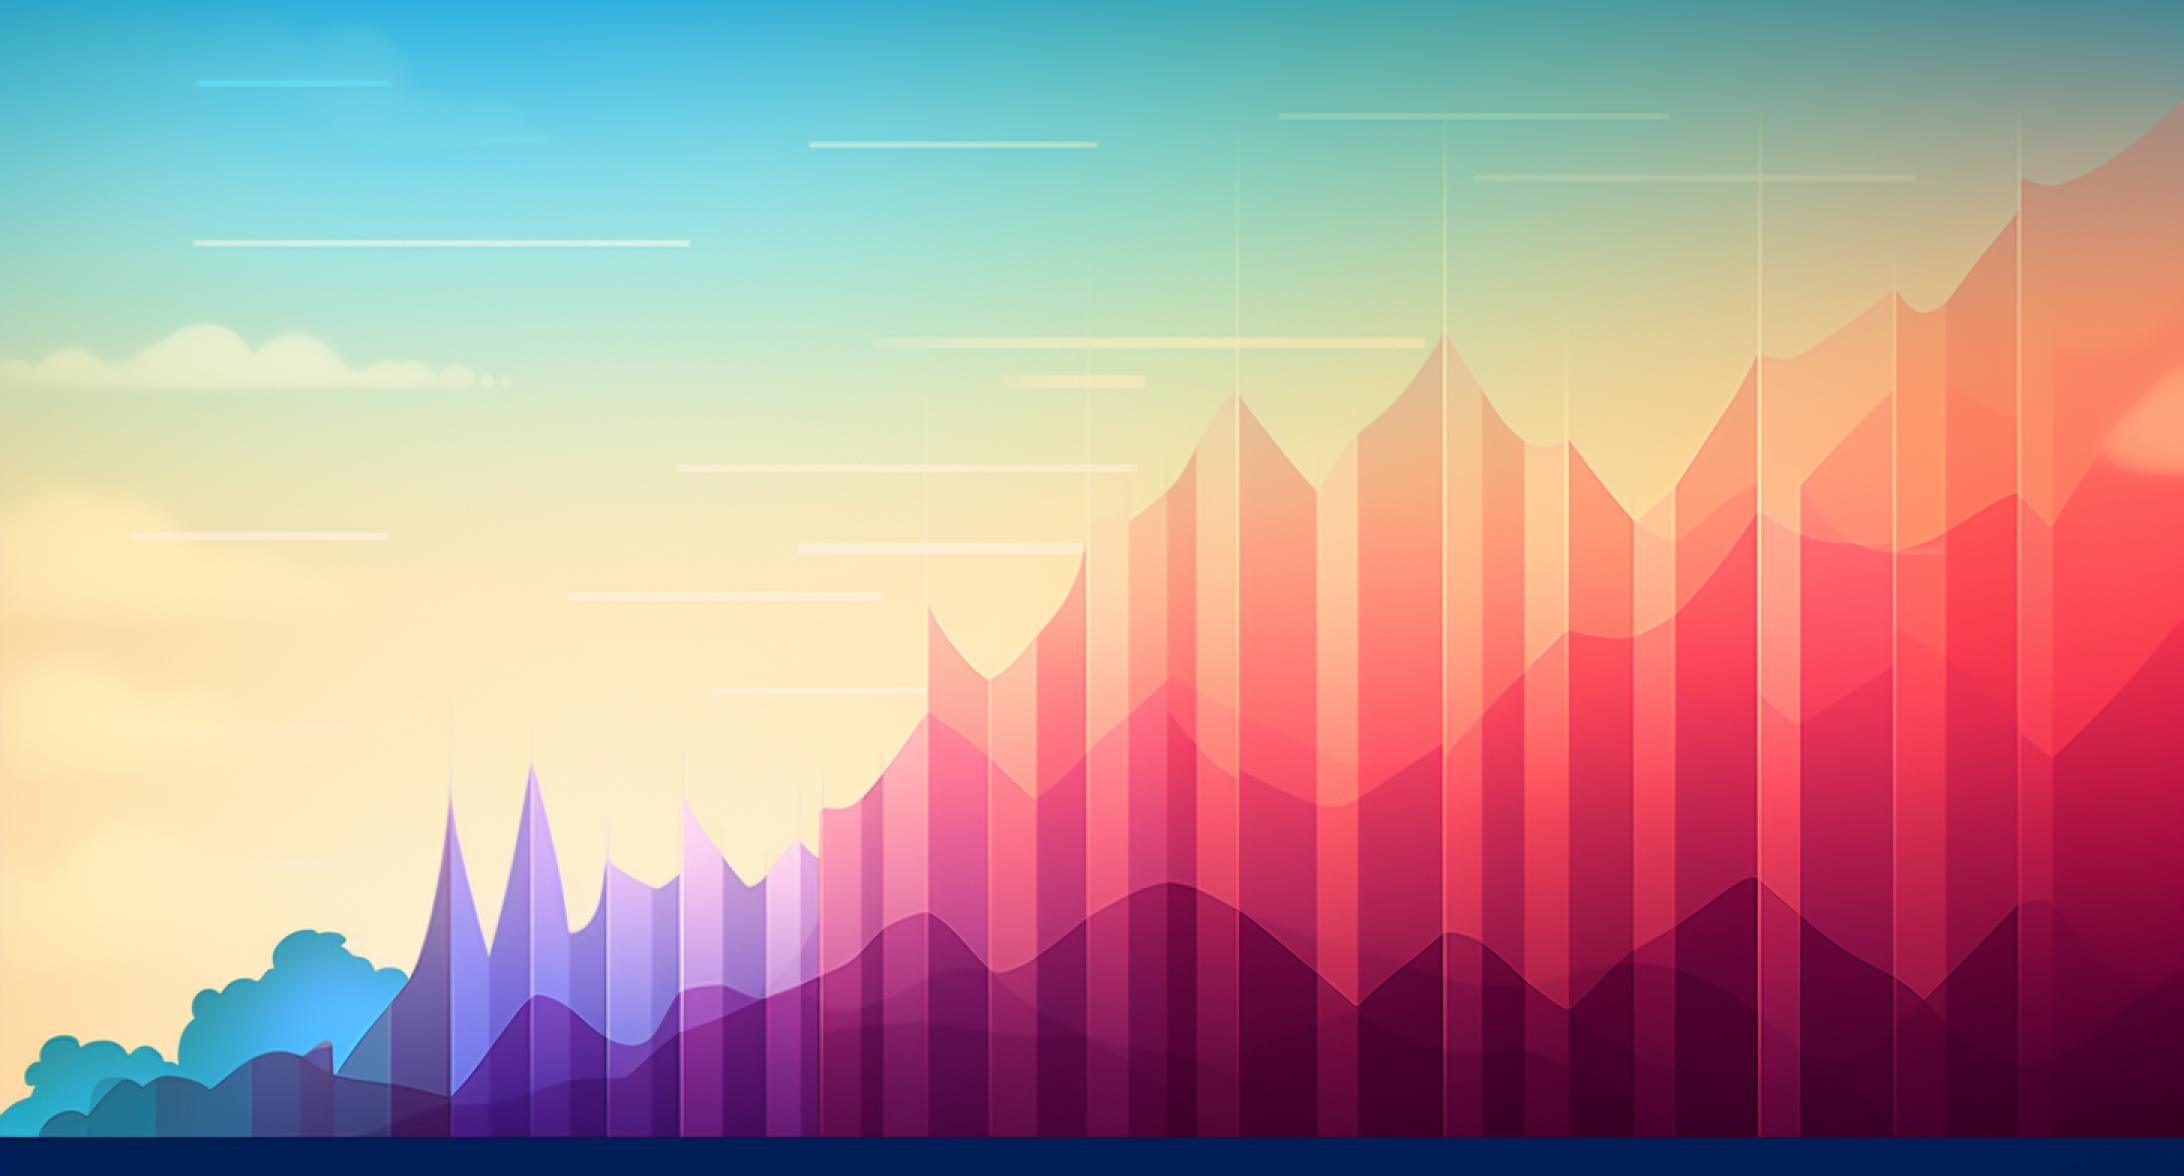 An illustration of a graph trending upwards that looks like mountains against a gradient sky